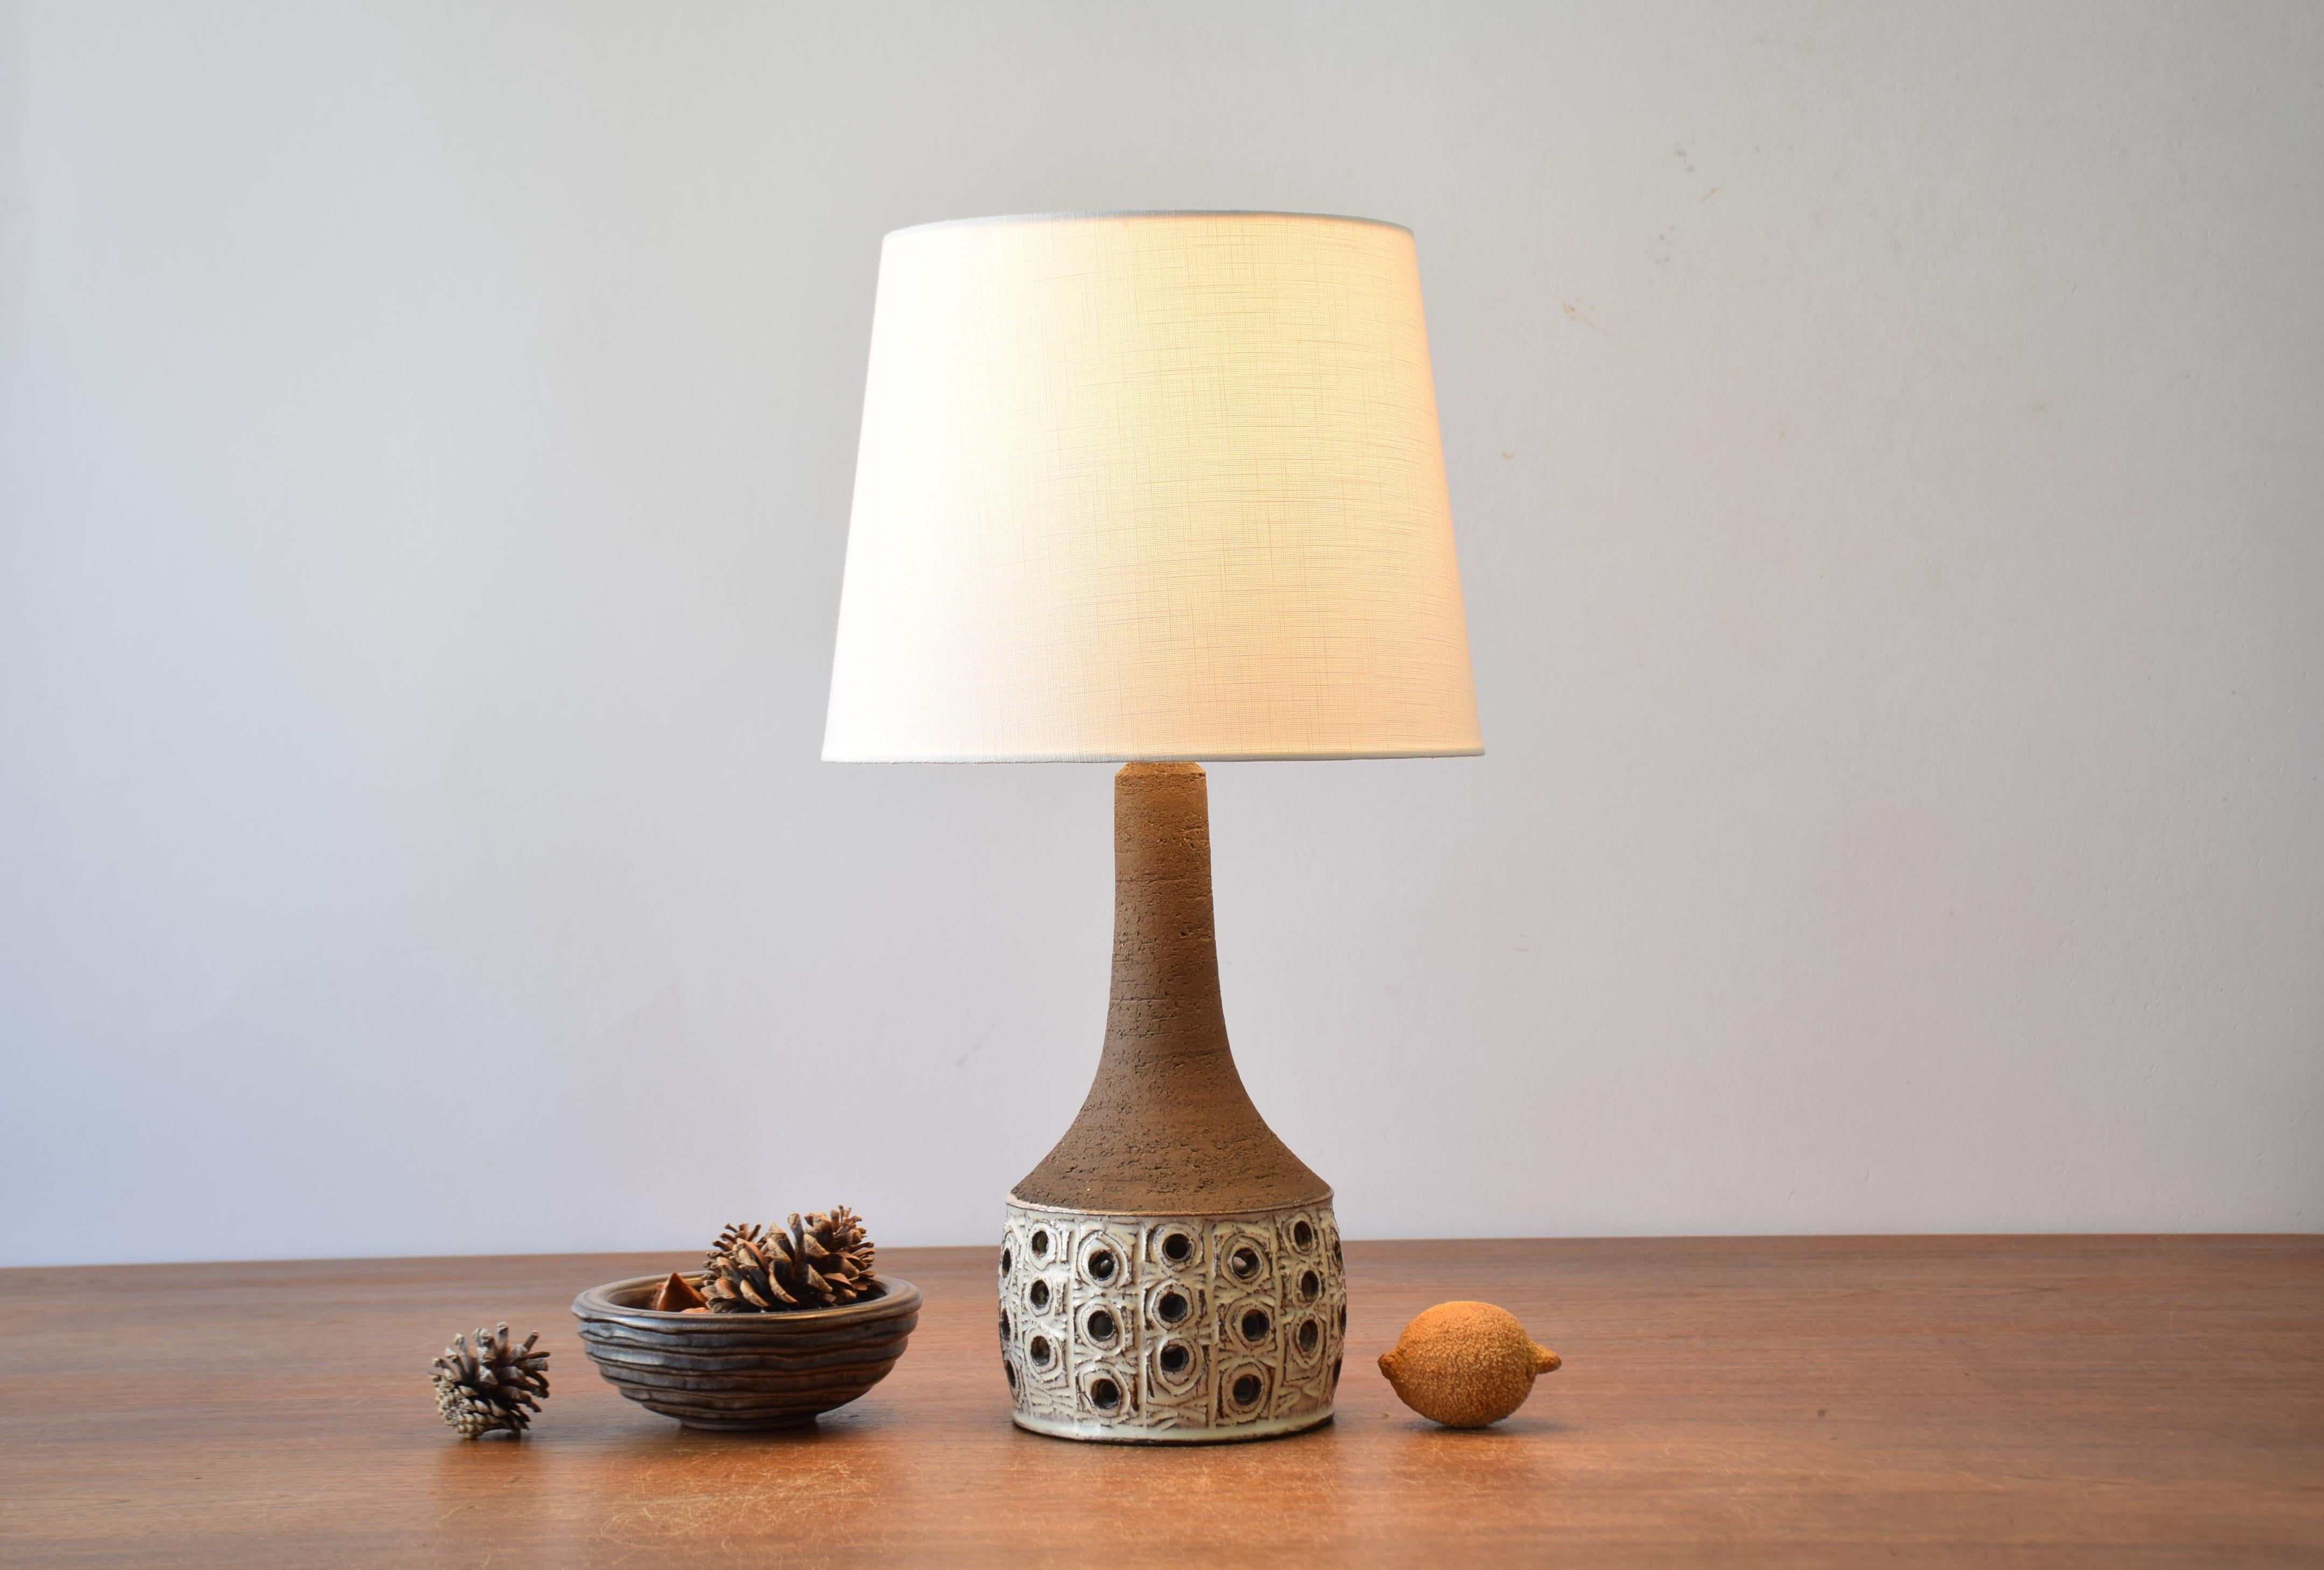 Midcentury ceramic table lamp by Danish ceramist Jette Hellerøe, ca 1970s.
The body of the lamp is decorated with a laced circle decor with beige glaze contrasted by the unglazed dark brown neck. The lamp is made with chamotte clay which gives a